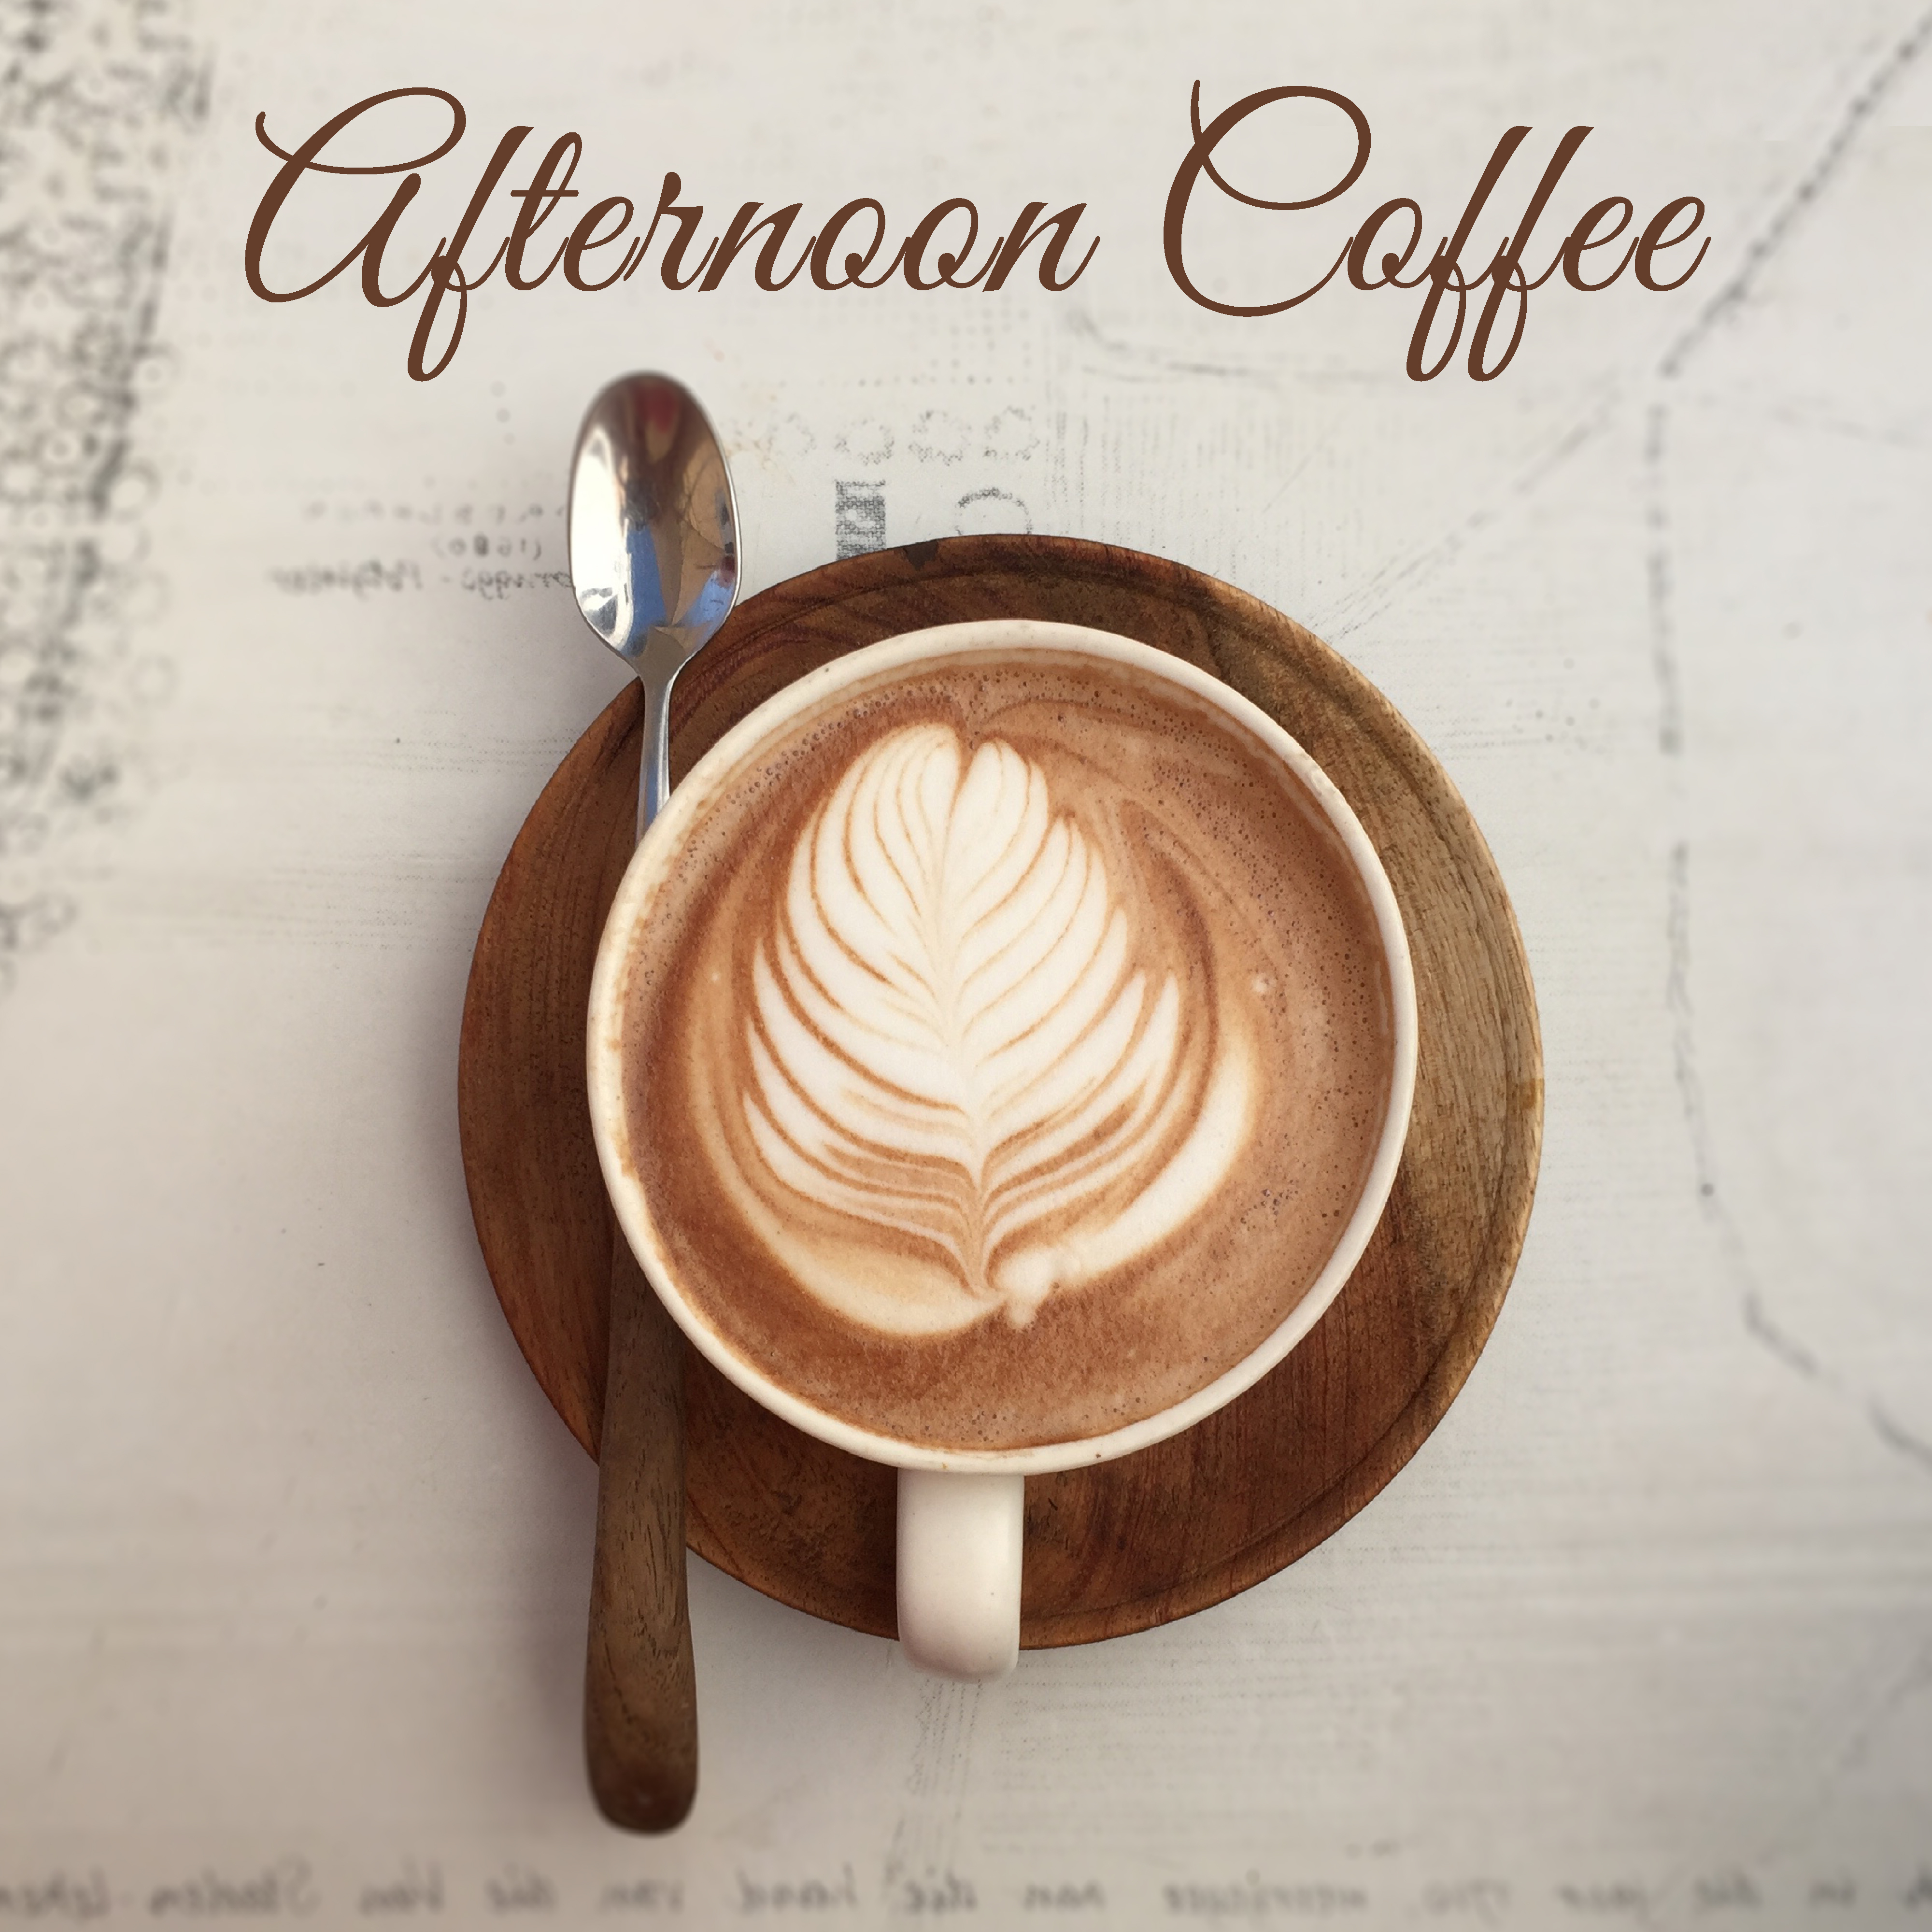 Afternoon Coffee – Restaurant Music, Jazz Cafe, Coffee Talk, Pure Relaxation, Stress Relief, Mellow Jazz, Ambient Music